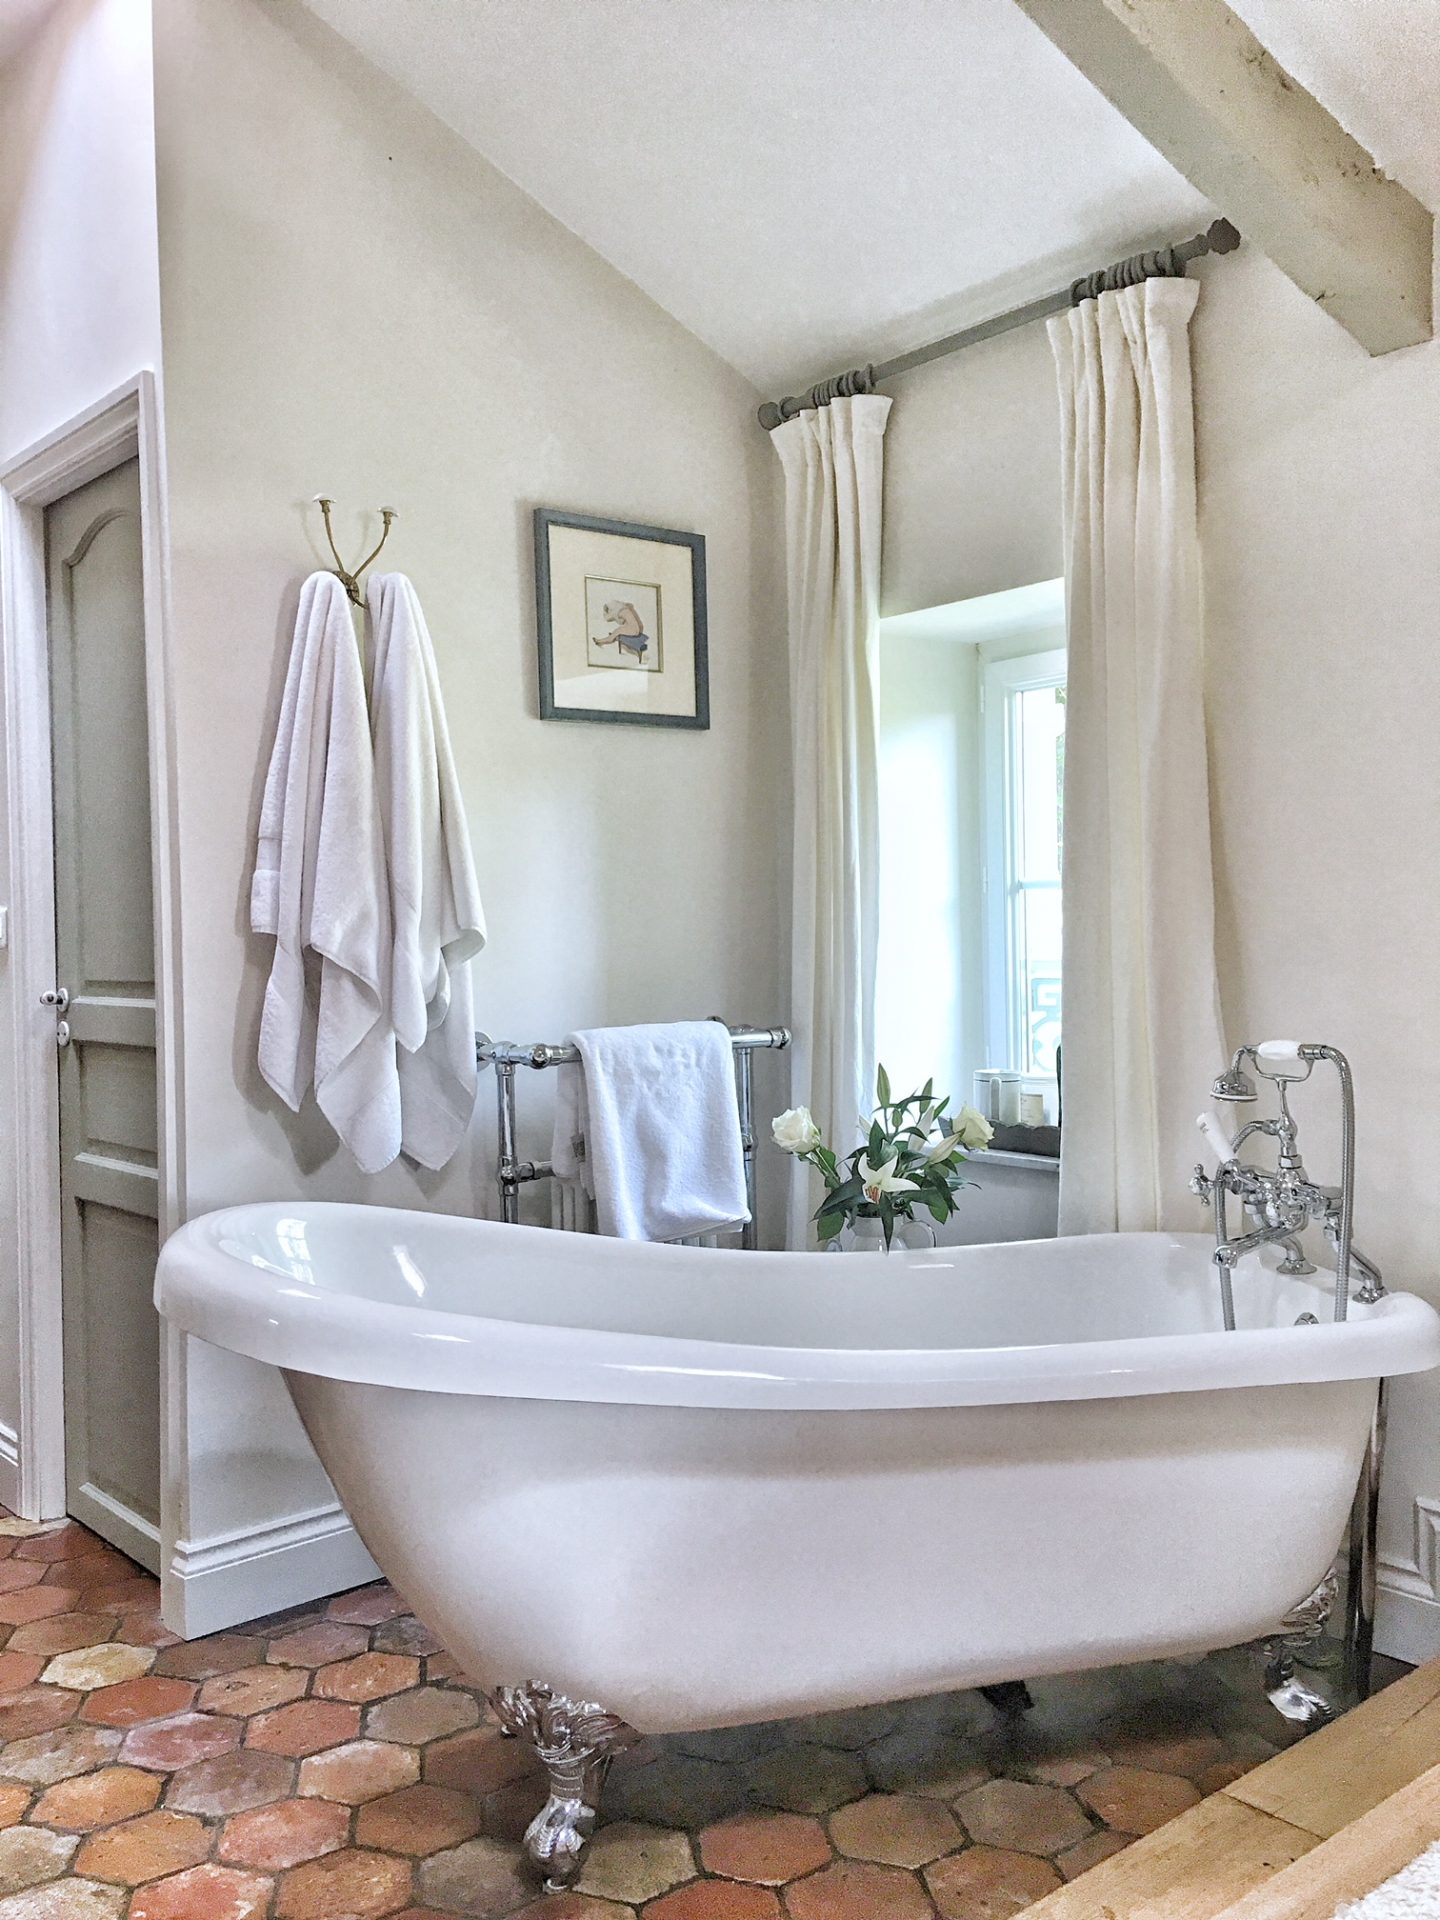 Traditional Classic White Bathroom Decorating Ideas for Vintage Lovers ...